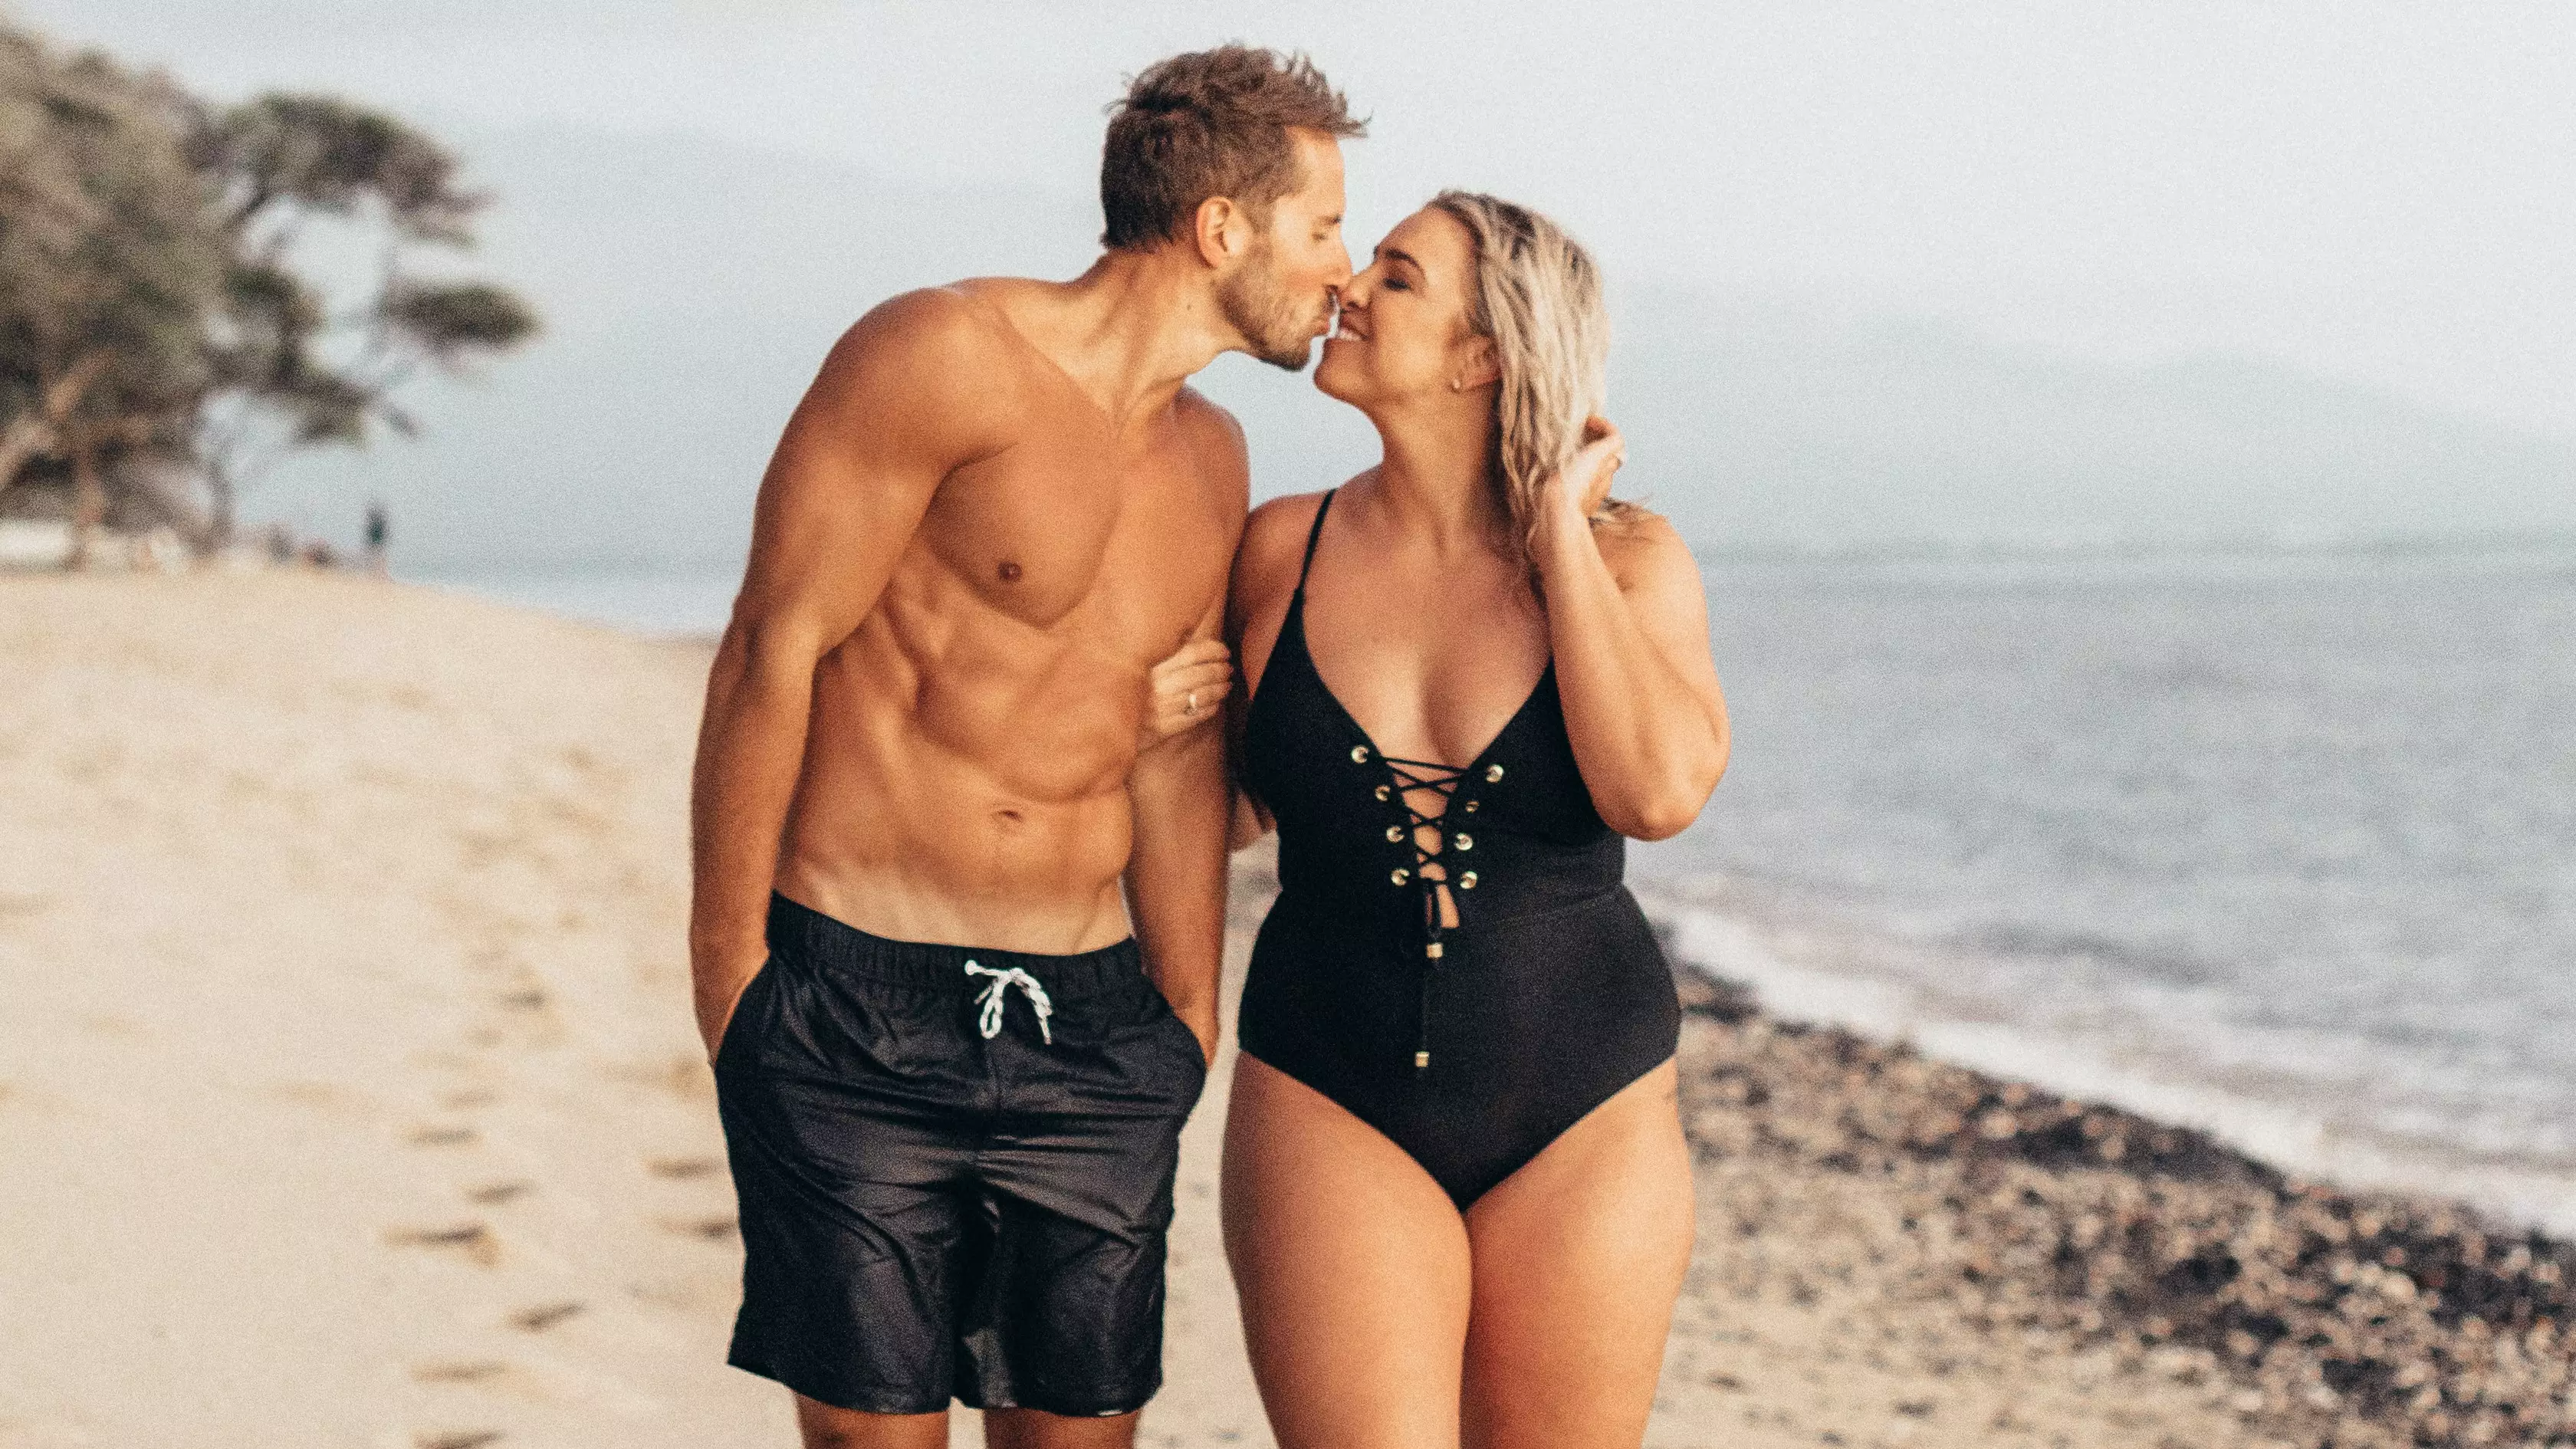 'Curvy' Woman Married To 'Mr Six Pack' Hits Back At Online Trolls 